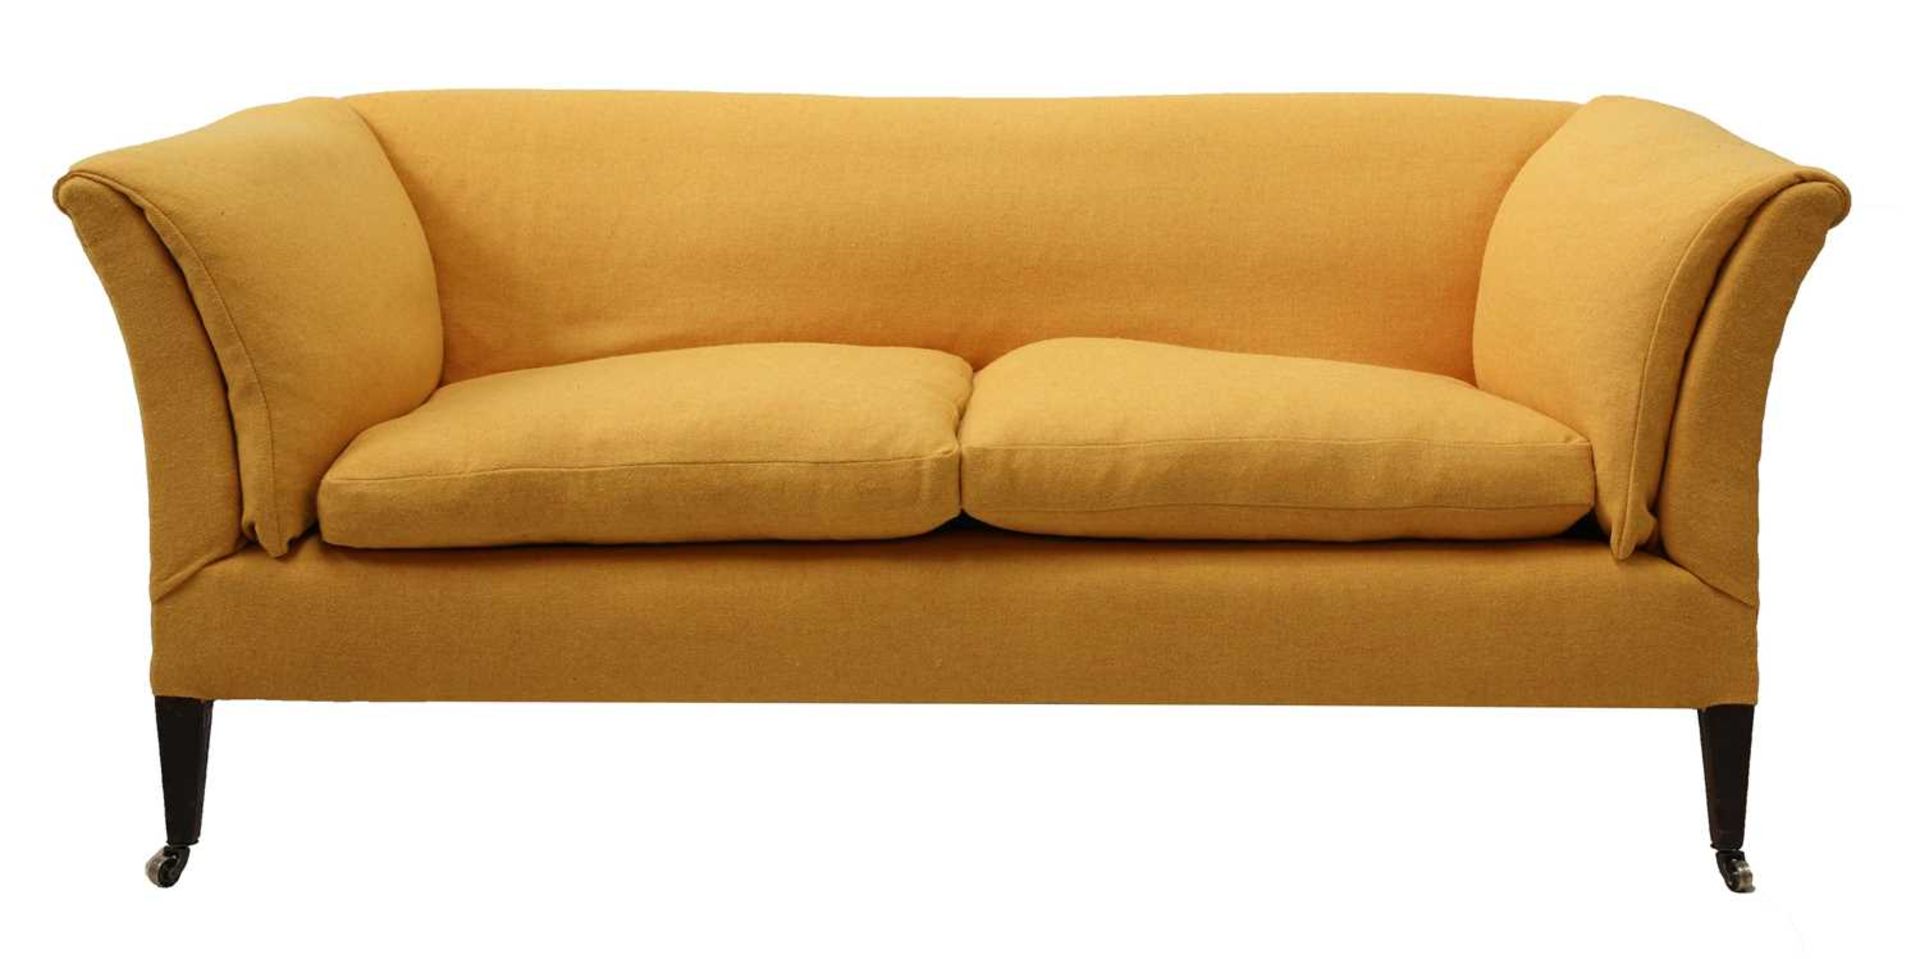 A two seater settee,